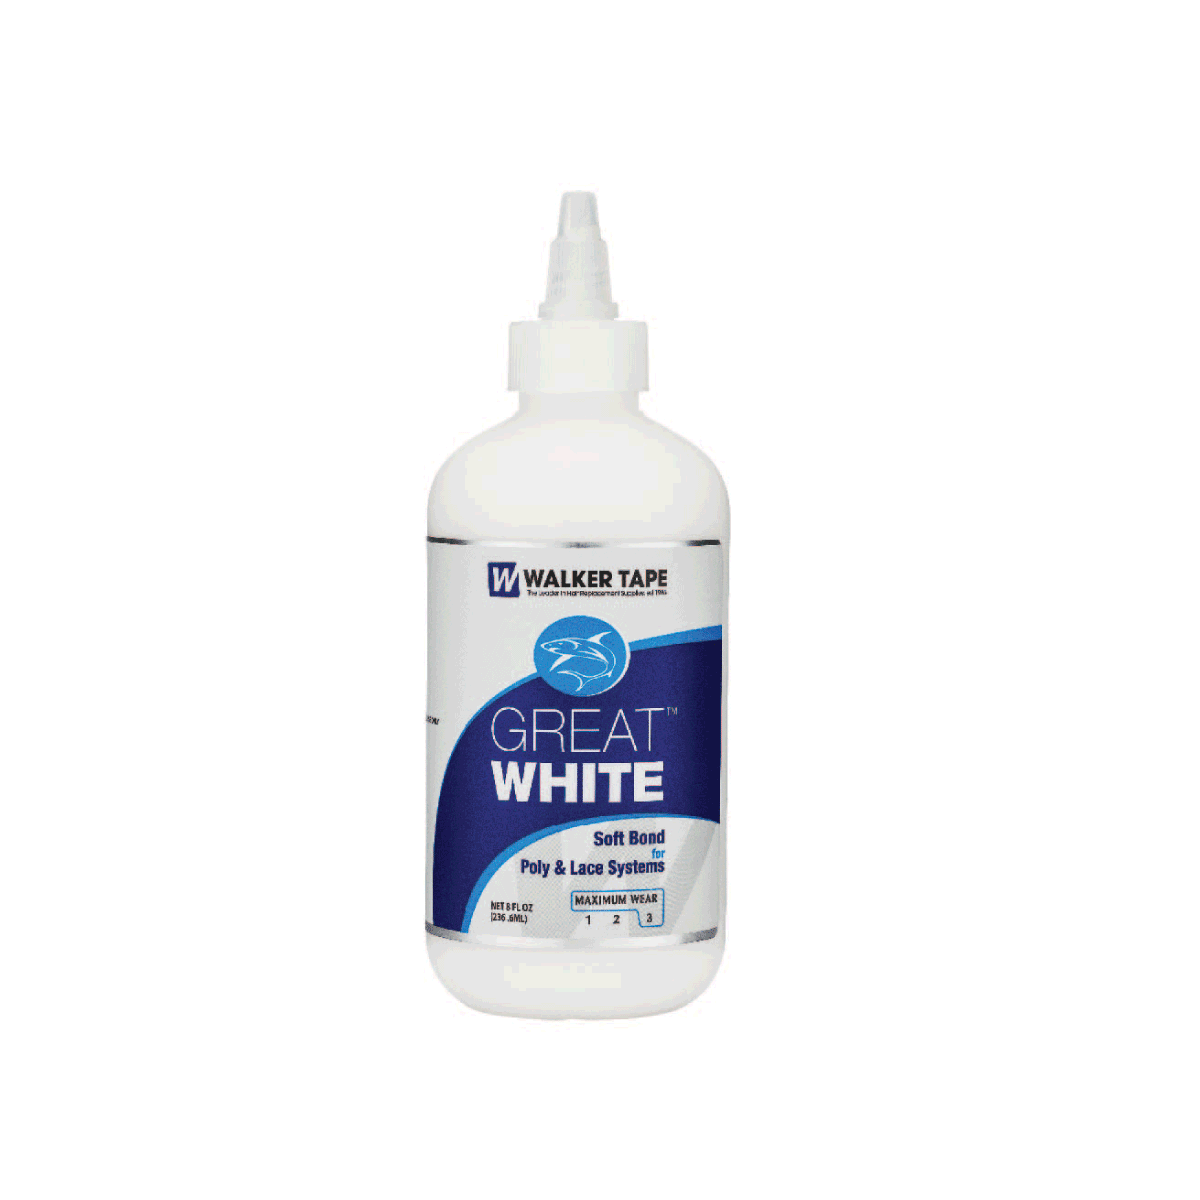 GREAT WHITE Soft Bond Adhesive for Poly & Lace Systems 8 oz.